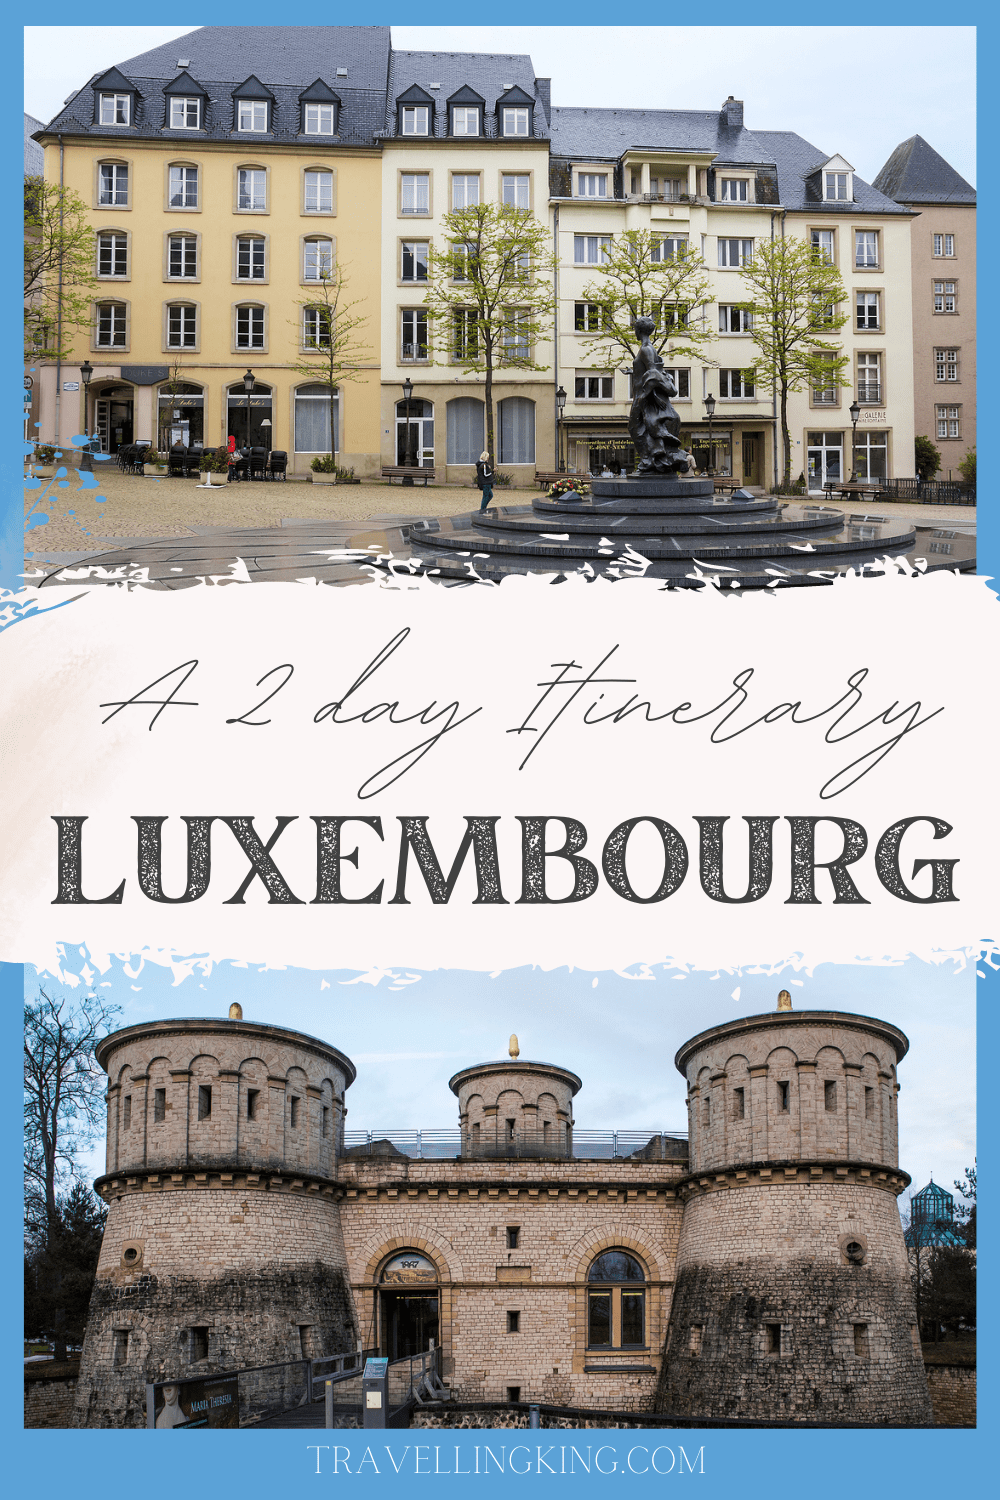 48 hours in Luxembourg - A 2 day Itinerary